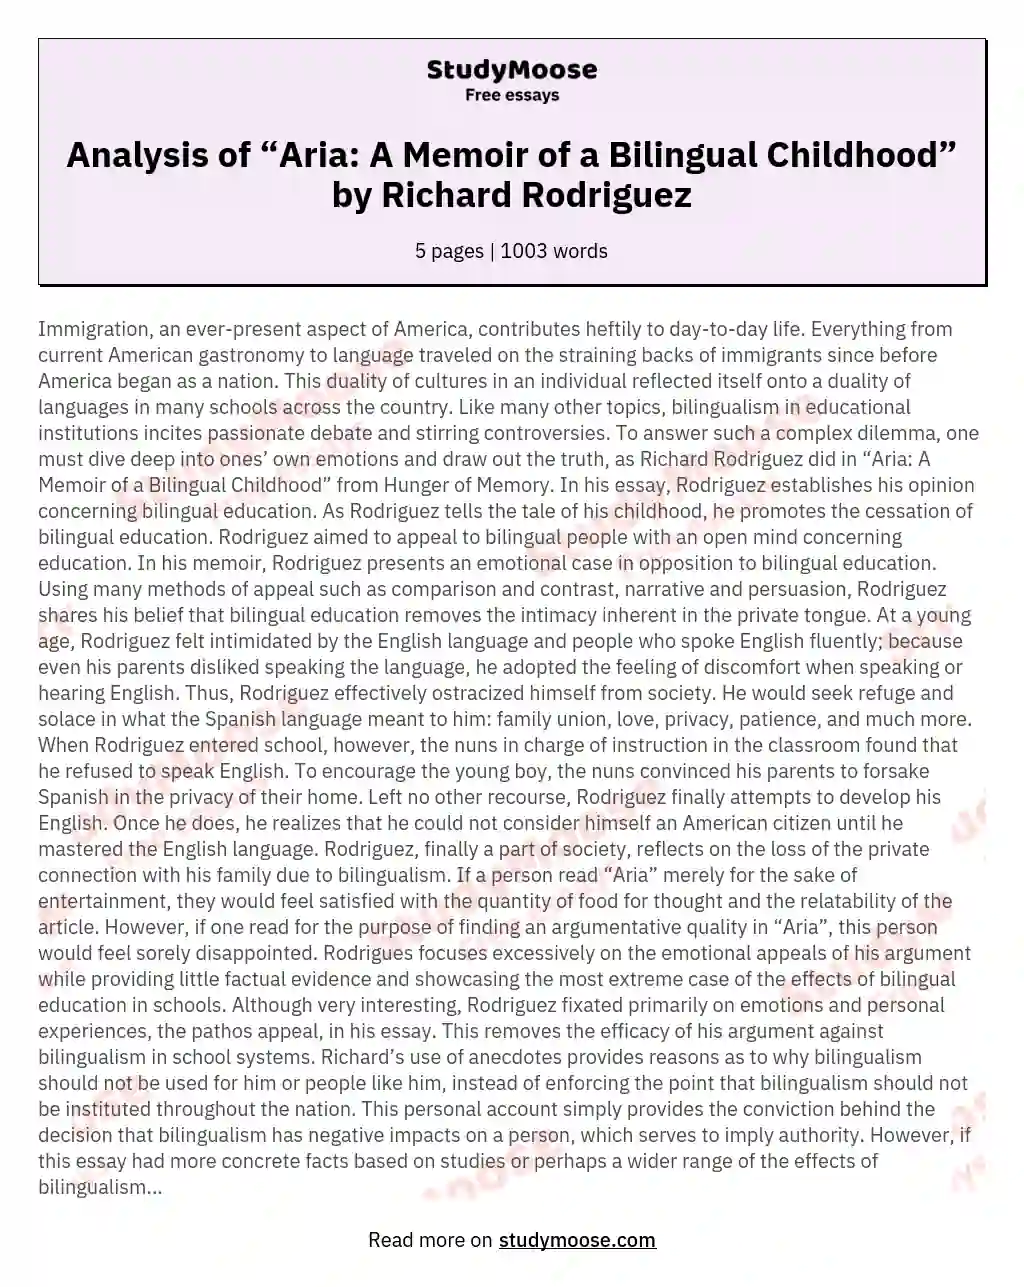 Analysis of “Aria: A Memoir of a Bilingual Childhood” by Richard Rodriguez essay